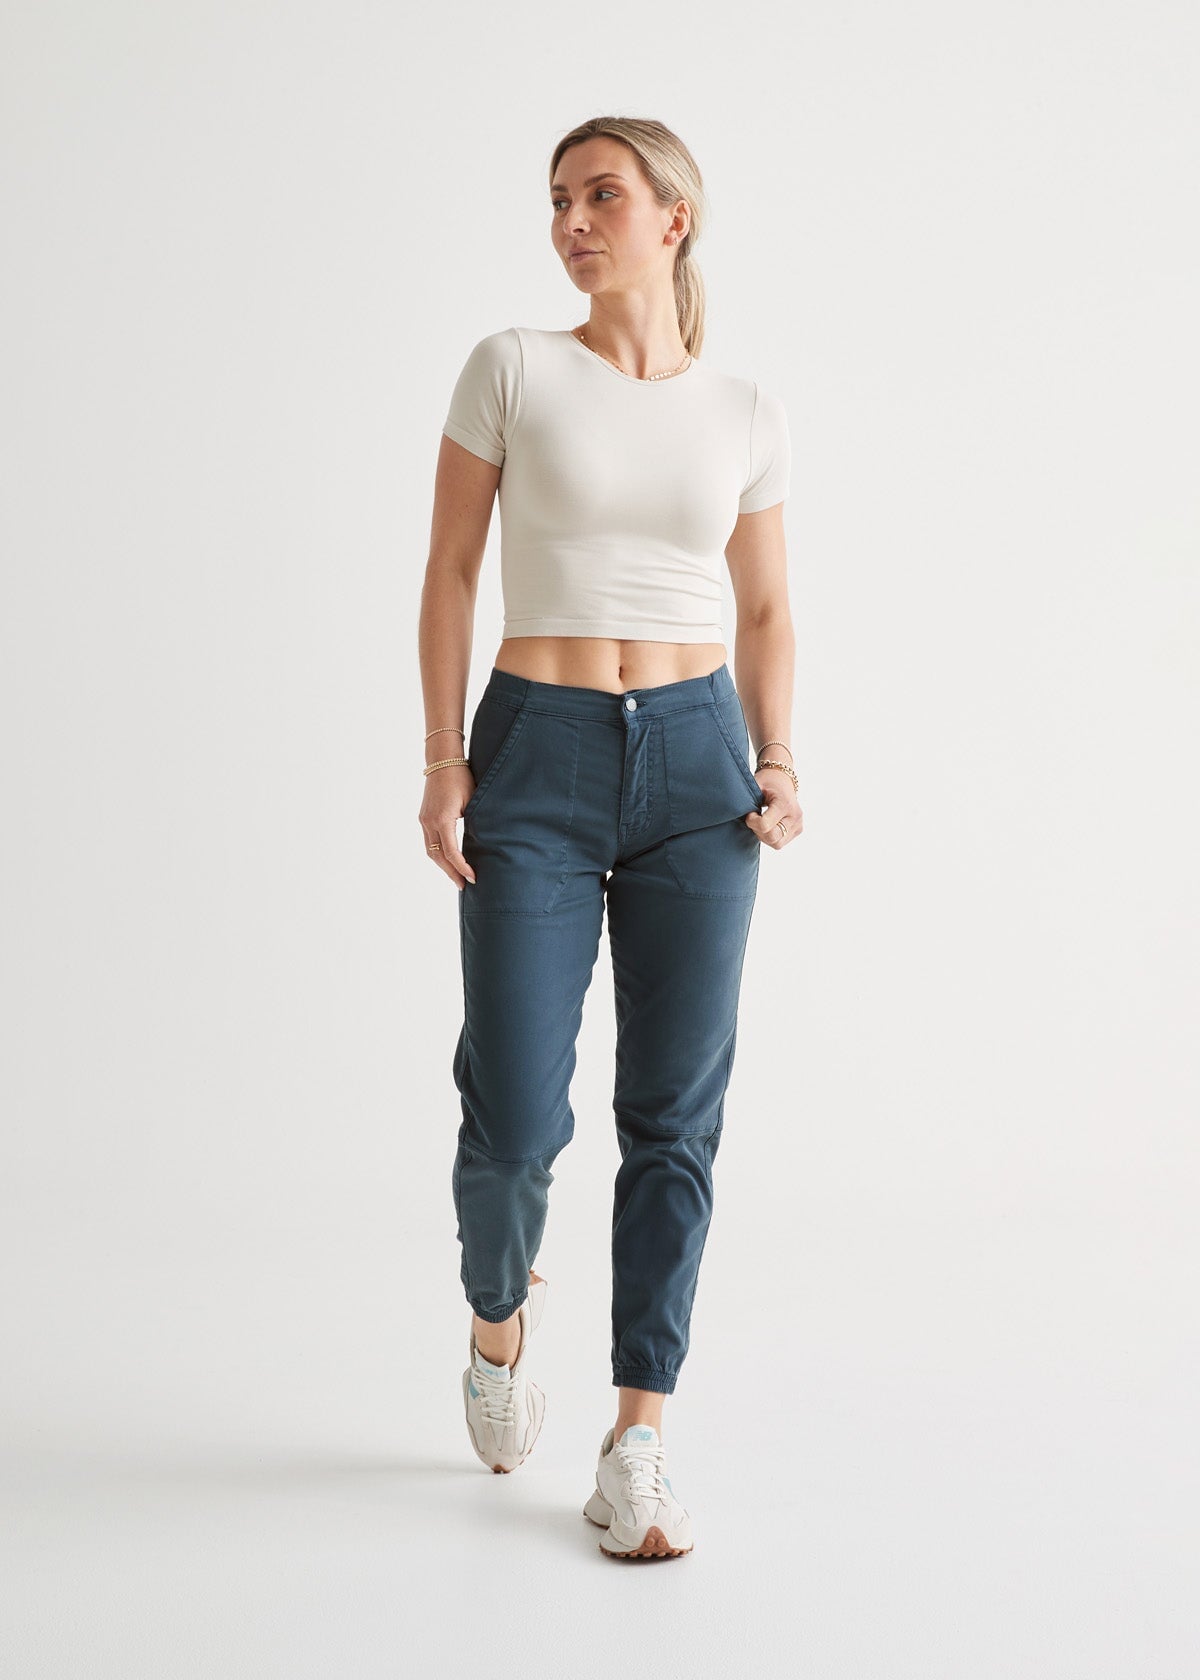 Women's High-Waisted Pants: 2000+ Items up to −87%